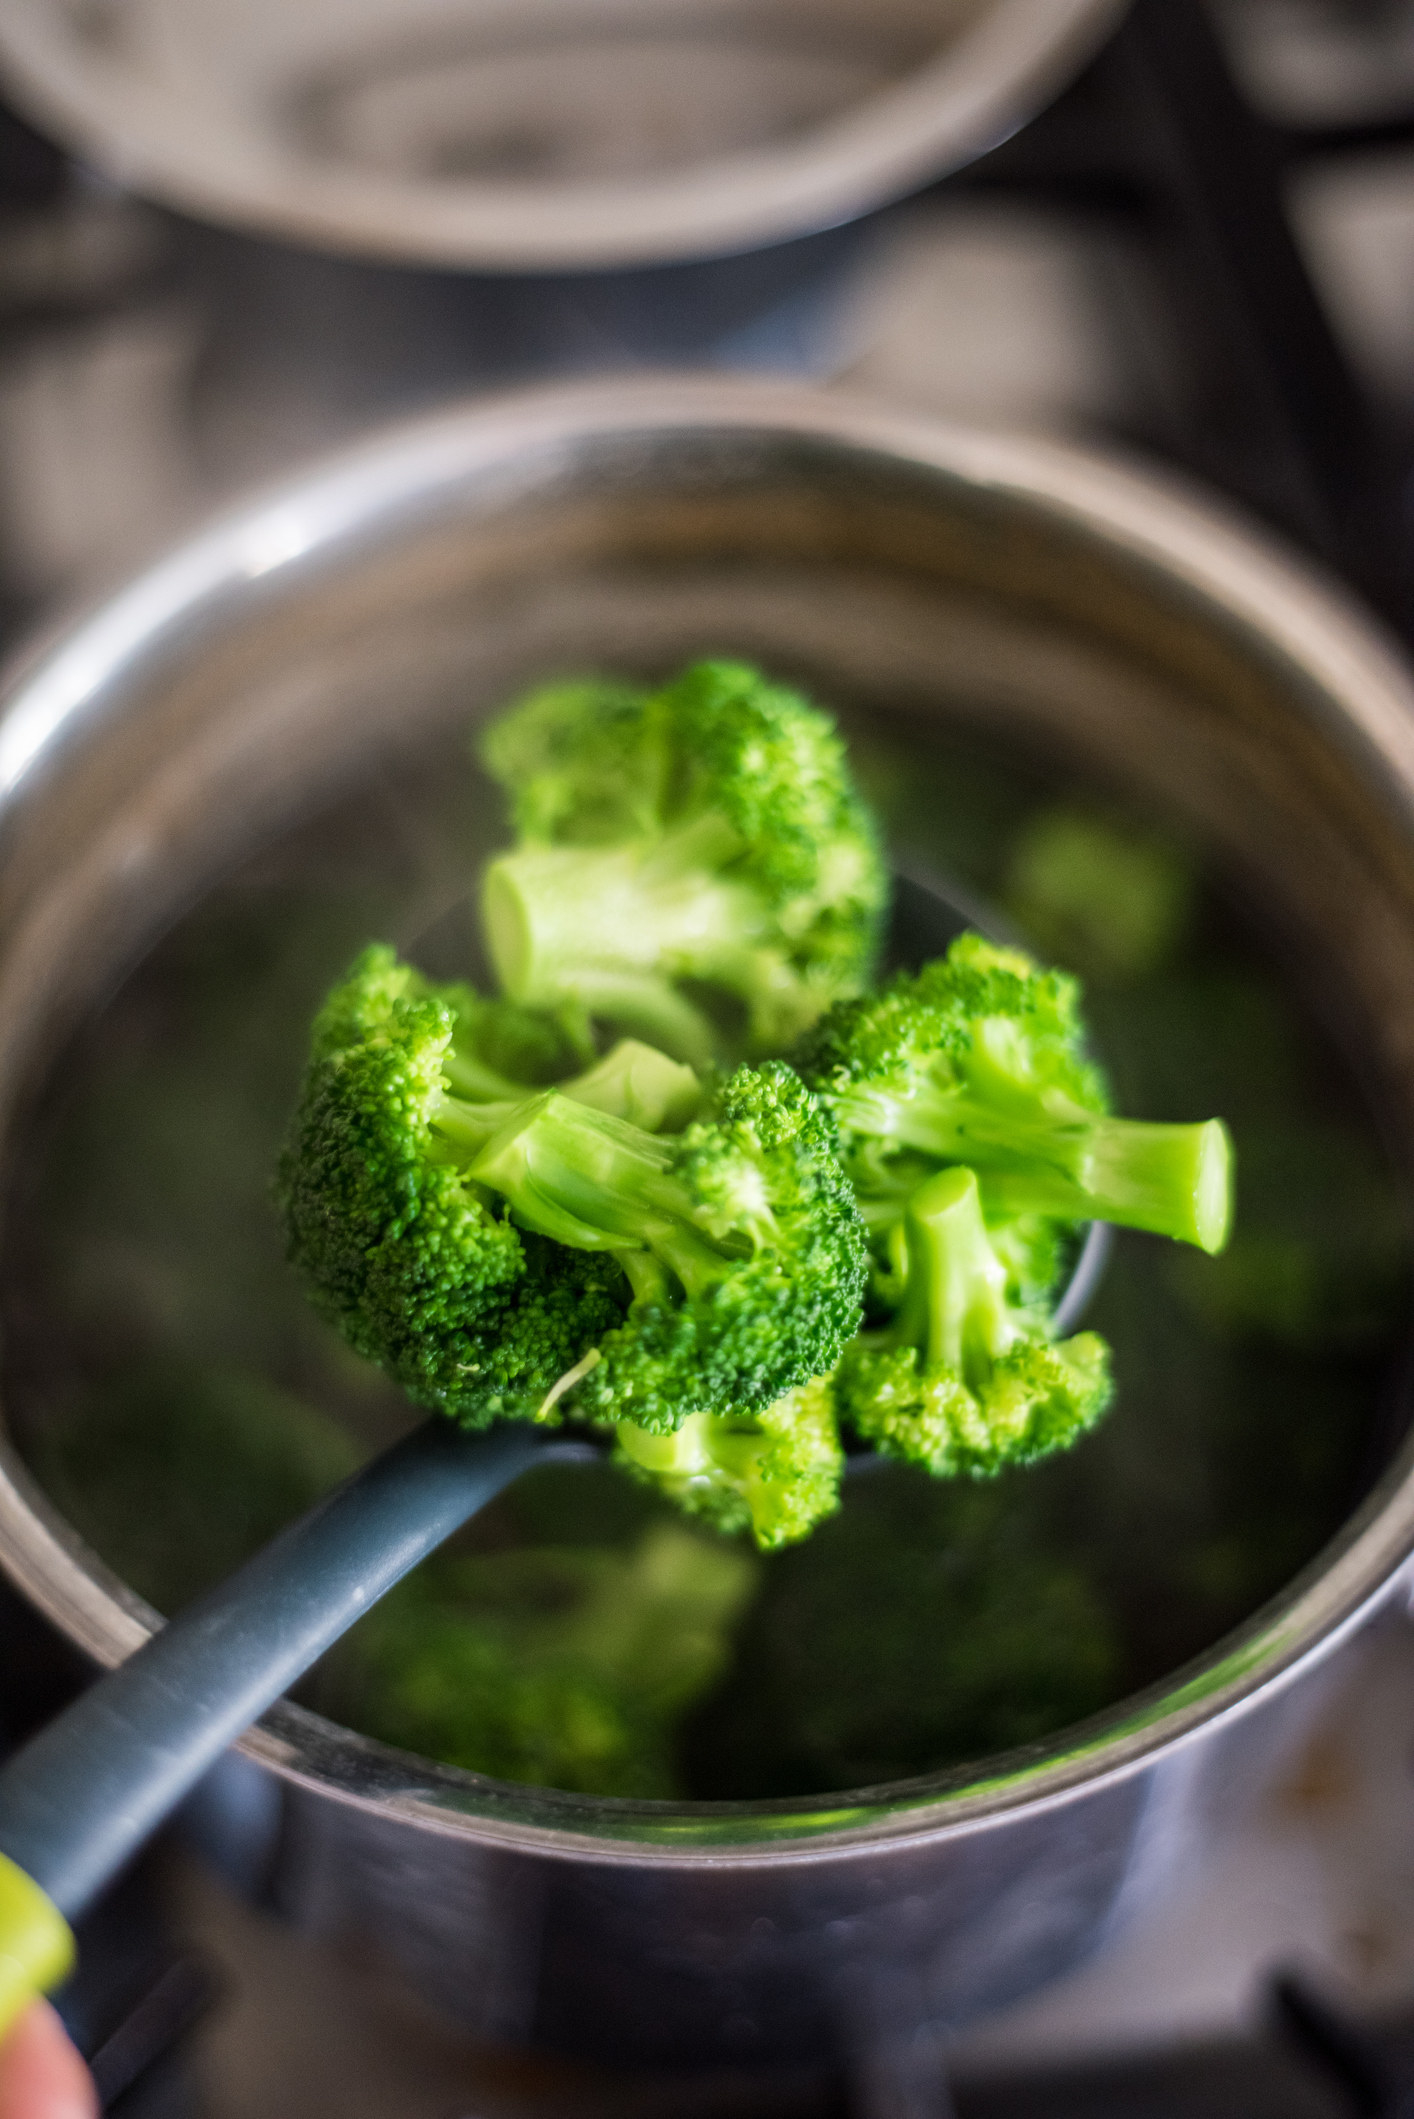 Straining boiled broccoli with a skimmer spoon